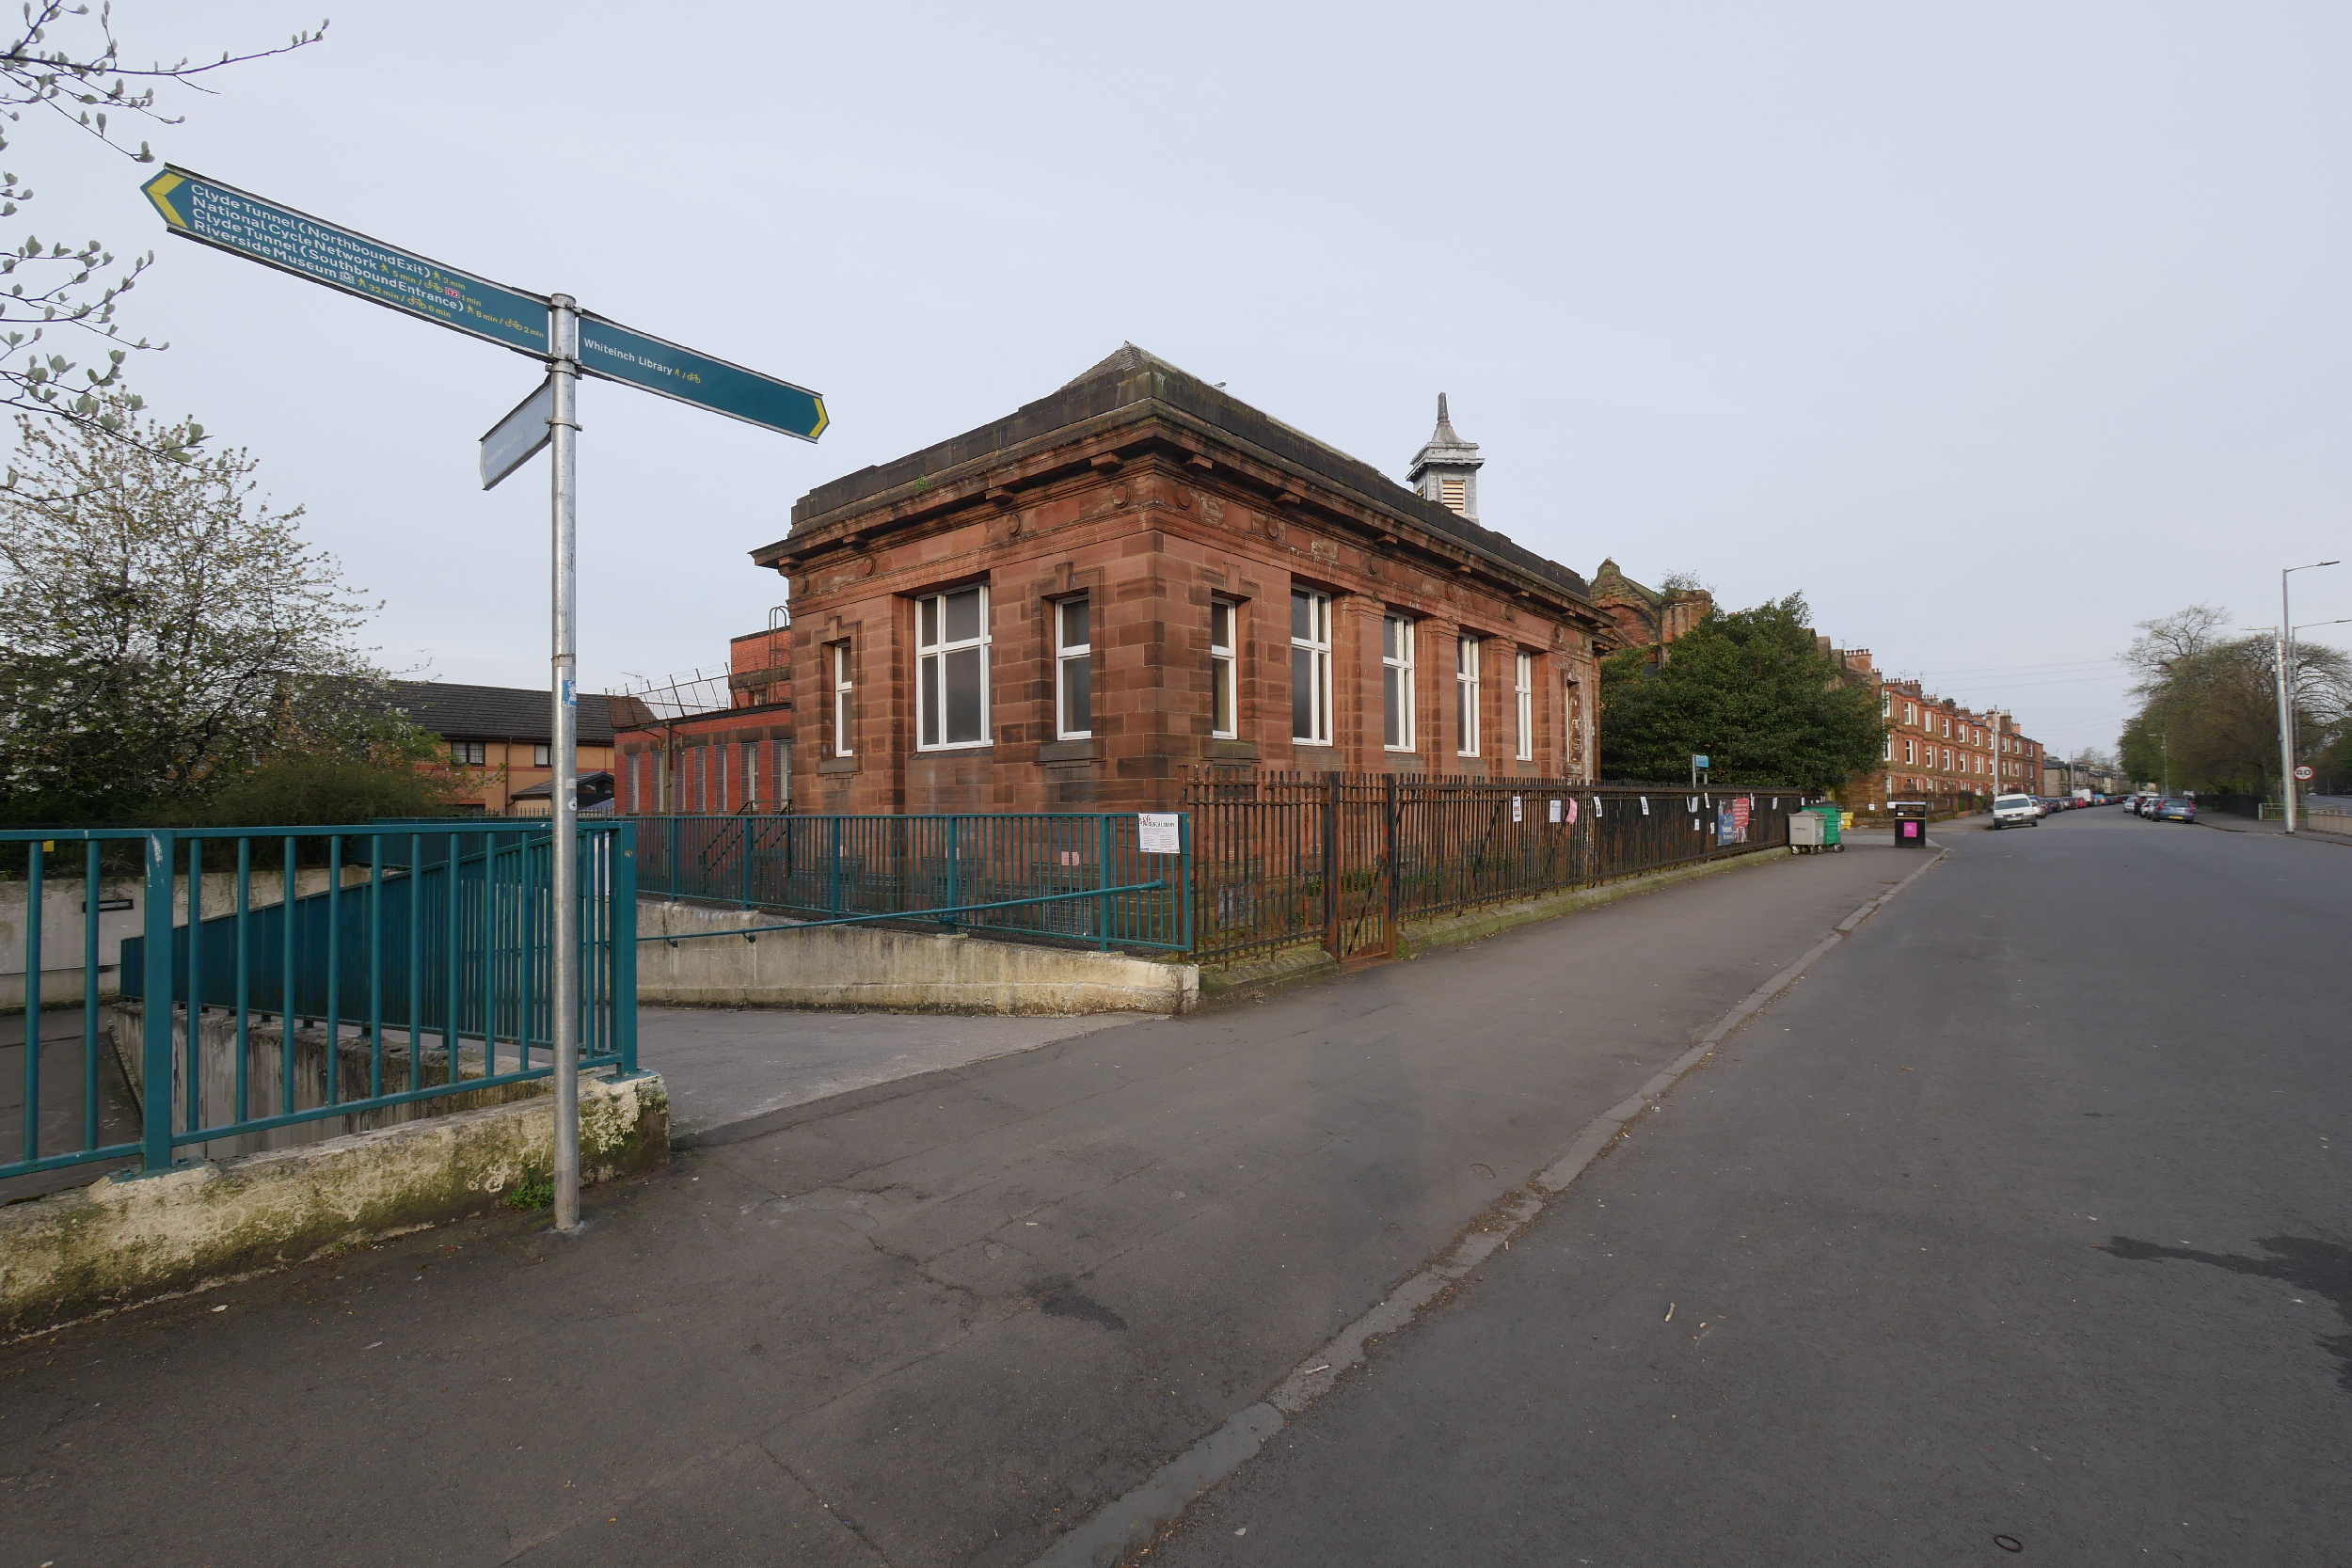 An image of Whiteinch library, Glasgow - Scottish News